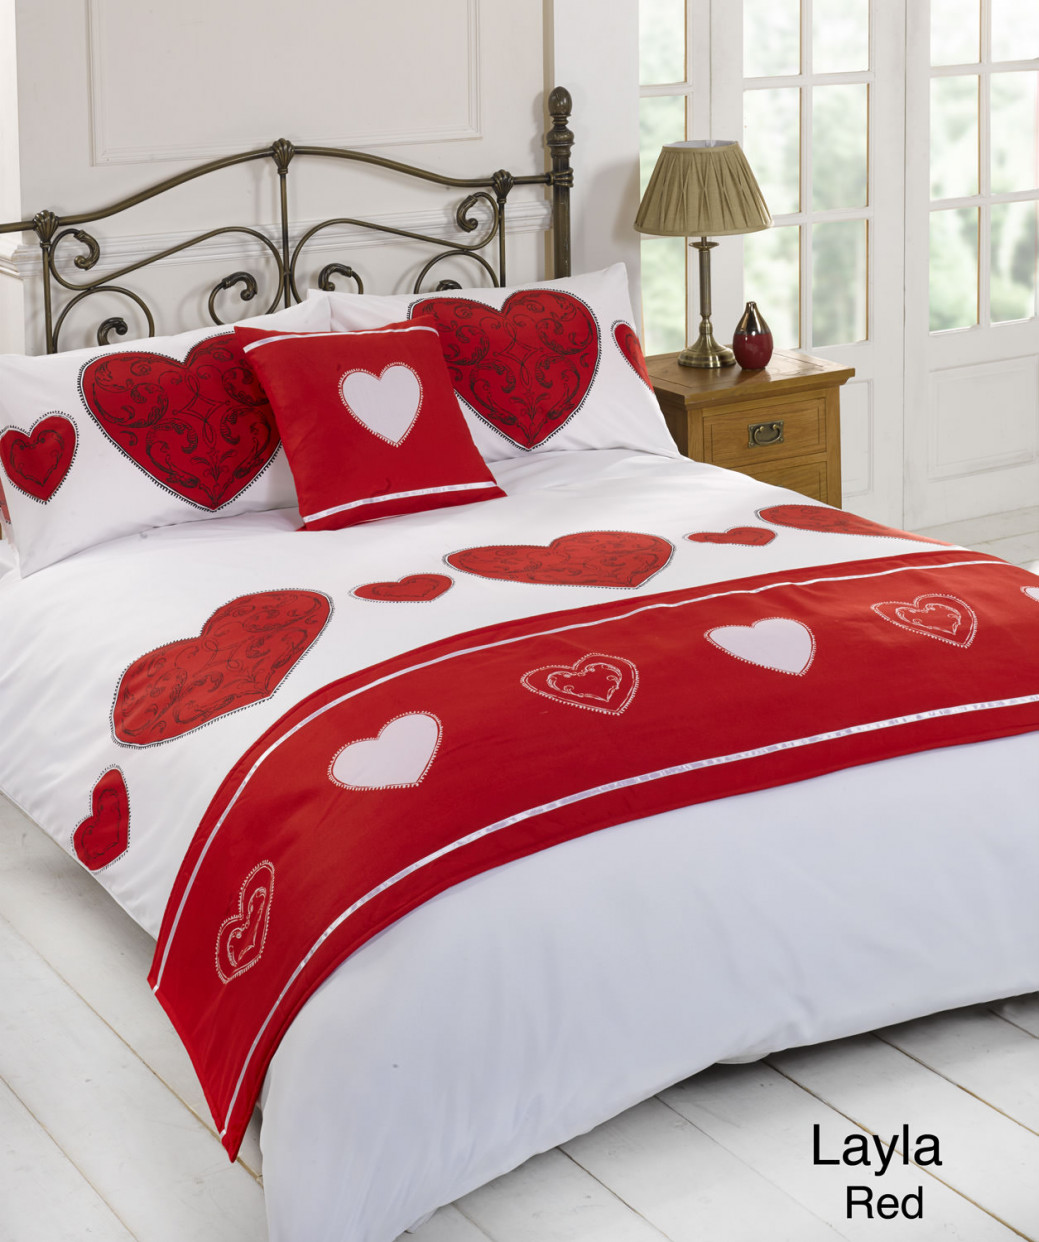 Layla Duvet Quilt Bedding Bed In A Bag Cushion Cover Runner - Red, Single>